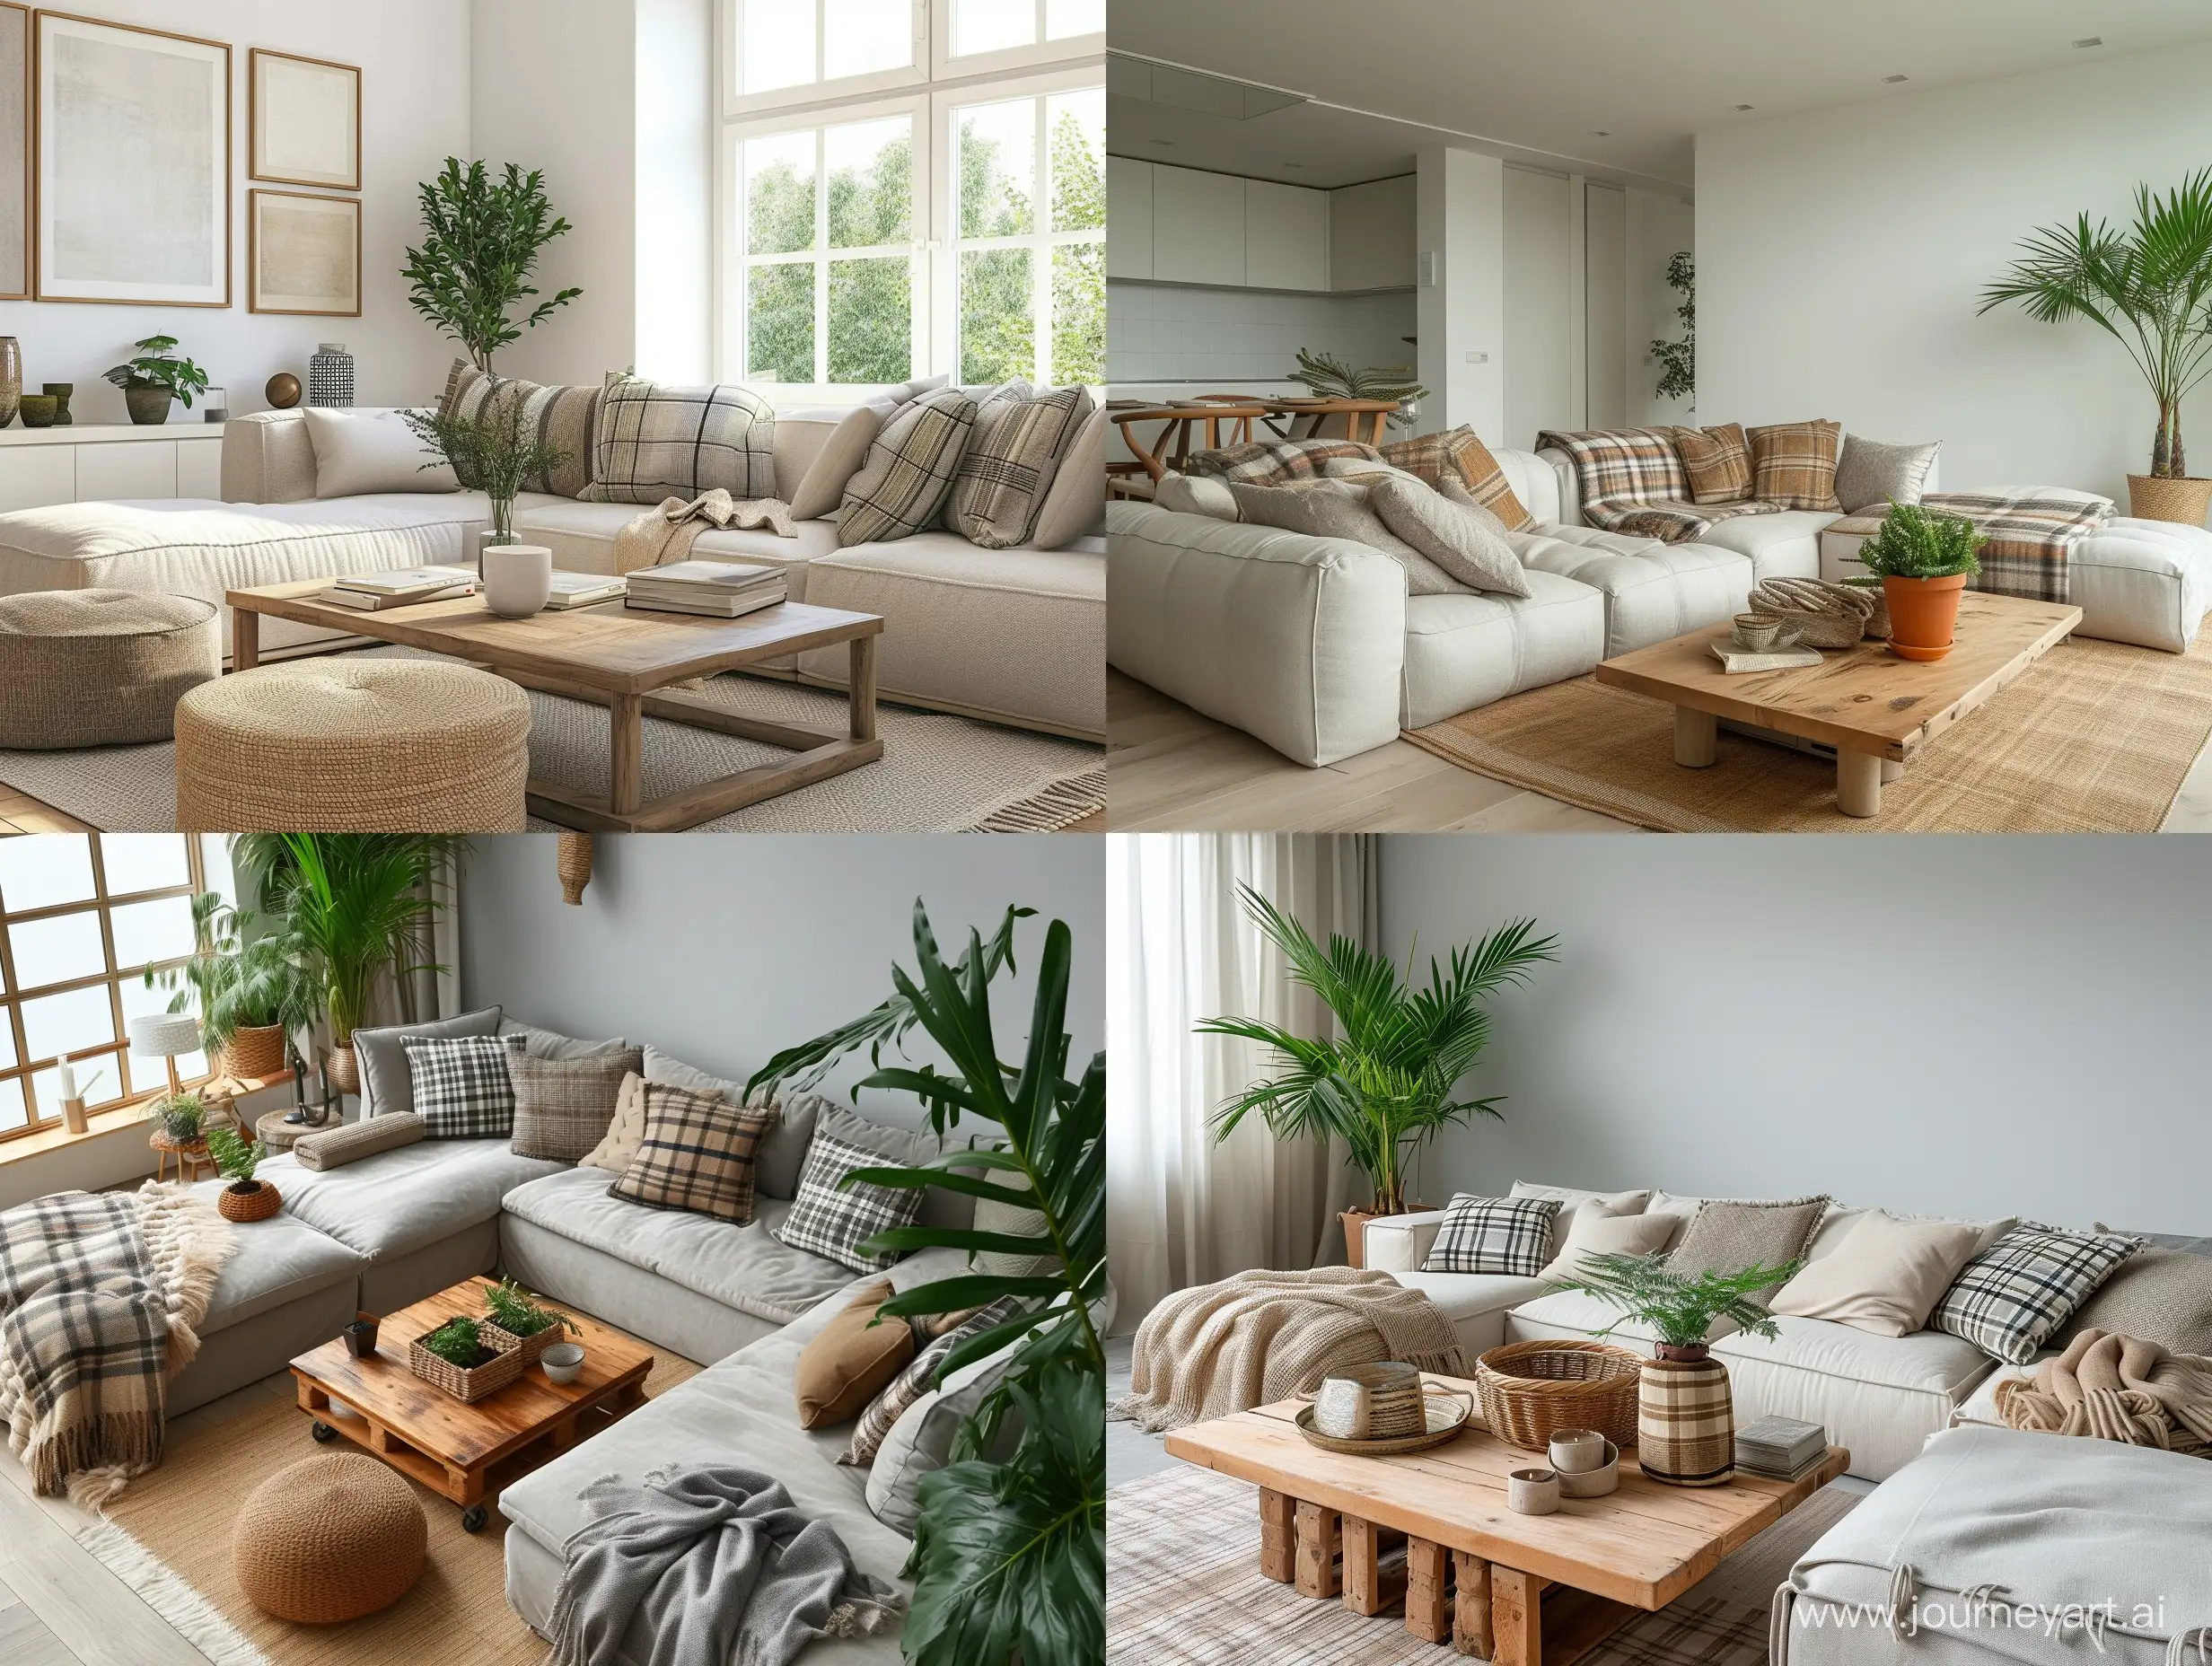 Modern open space interior with modular sofa design, furniture, wooden coffee table, plaid, pillows, tropical plants and elegant personal accessories in stylish home decor. Neutral living room --v 6 --ar 4:3 --no 5208